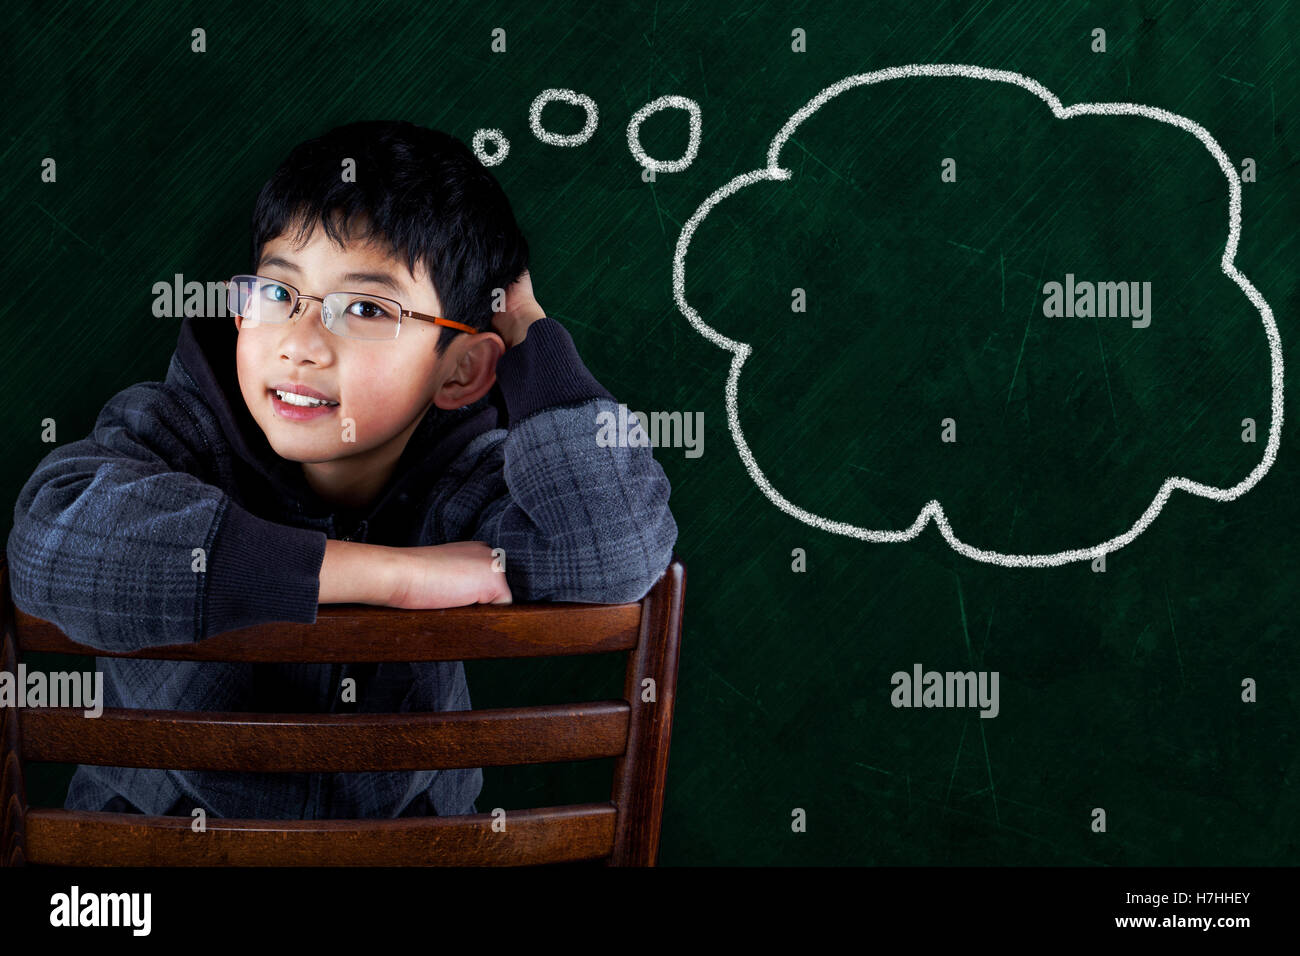 Smart Asian boy sitting on classroom chair with chalkboard background and thought bubble copy space. Stock Photo